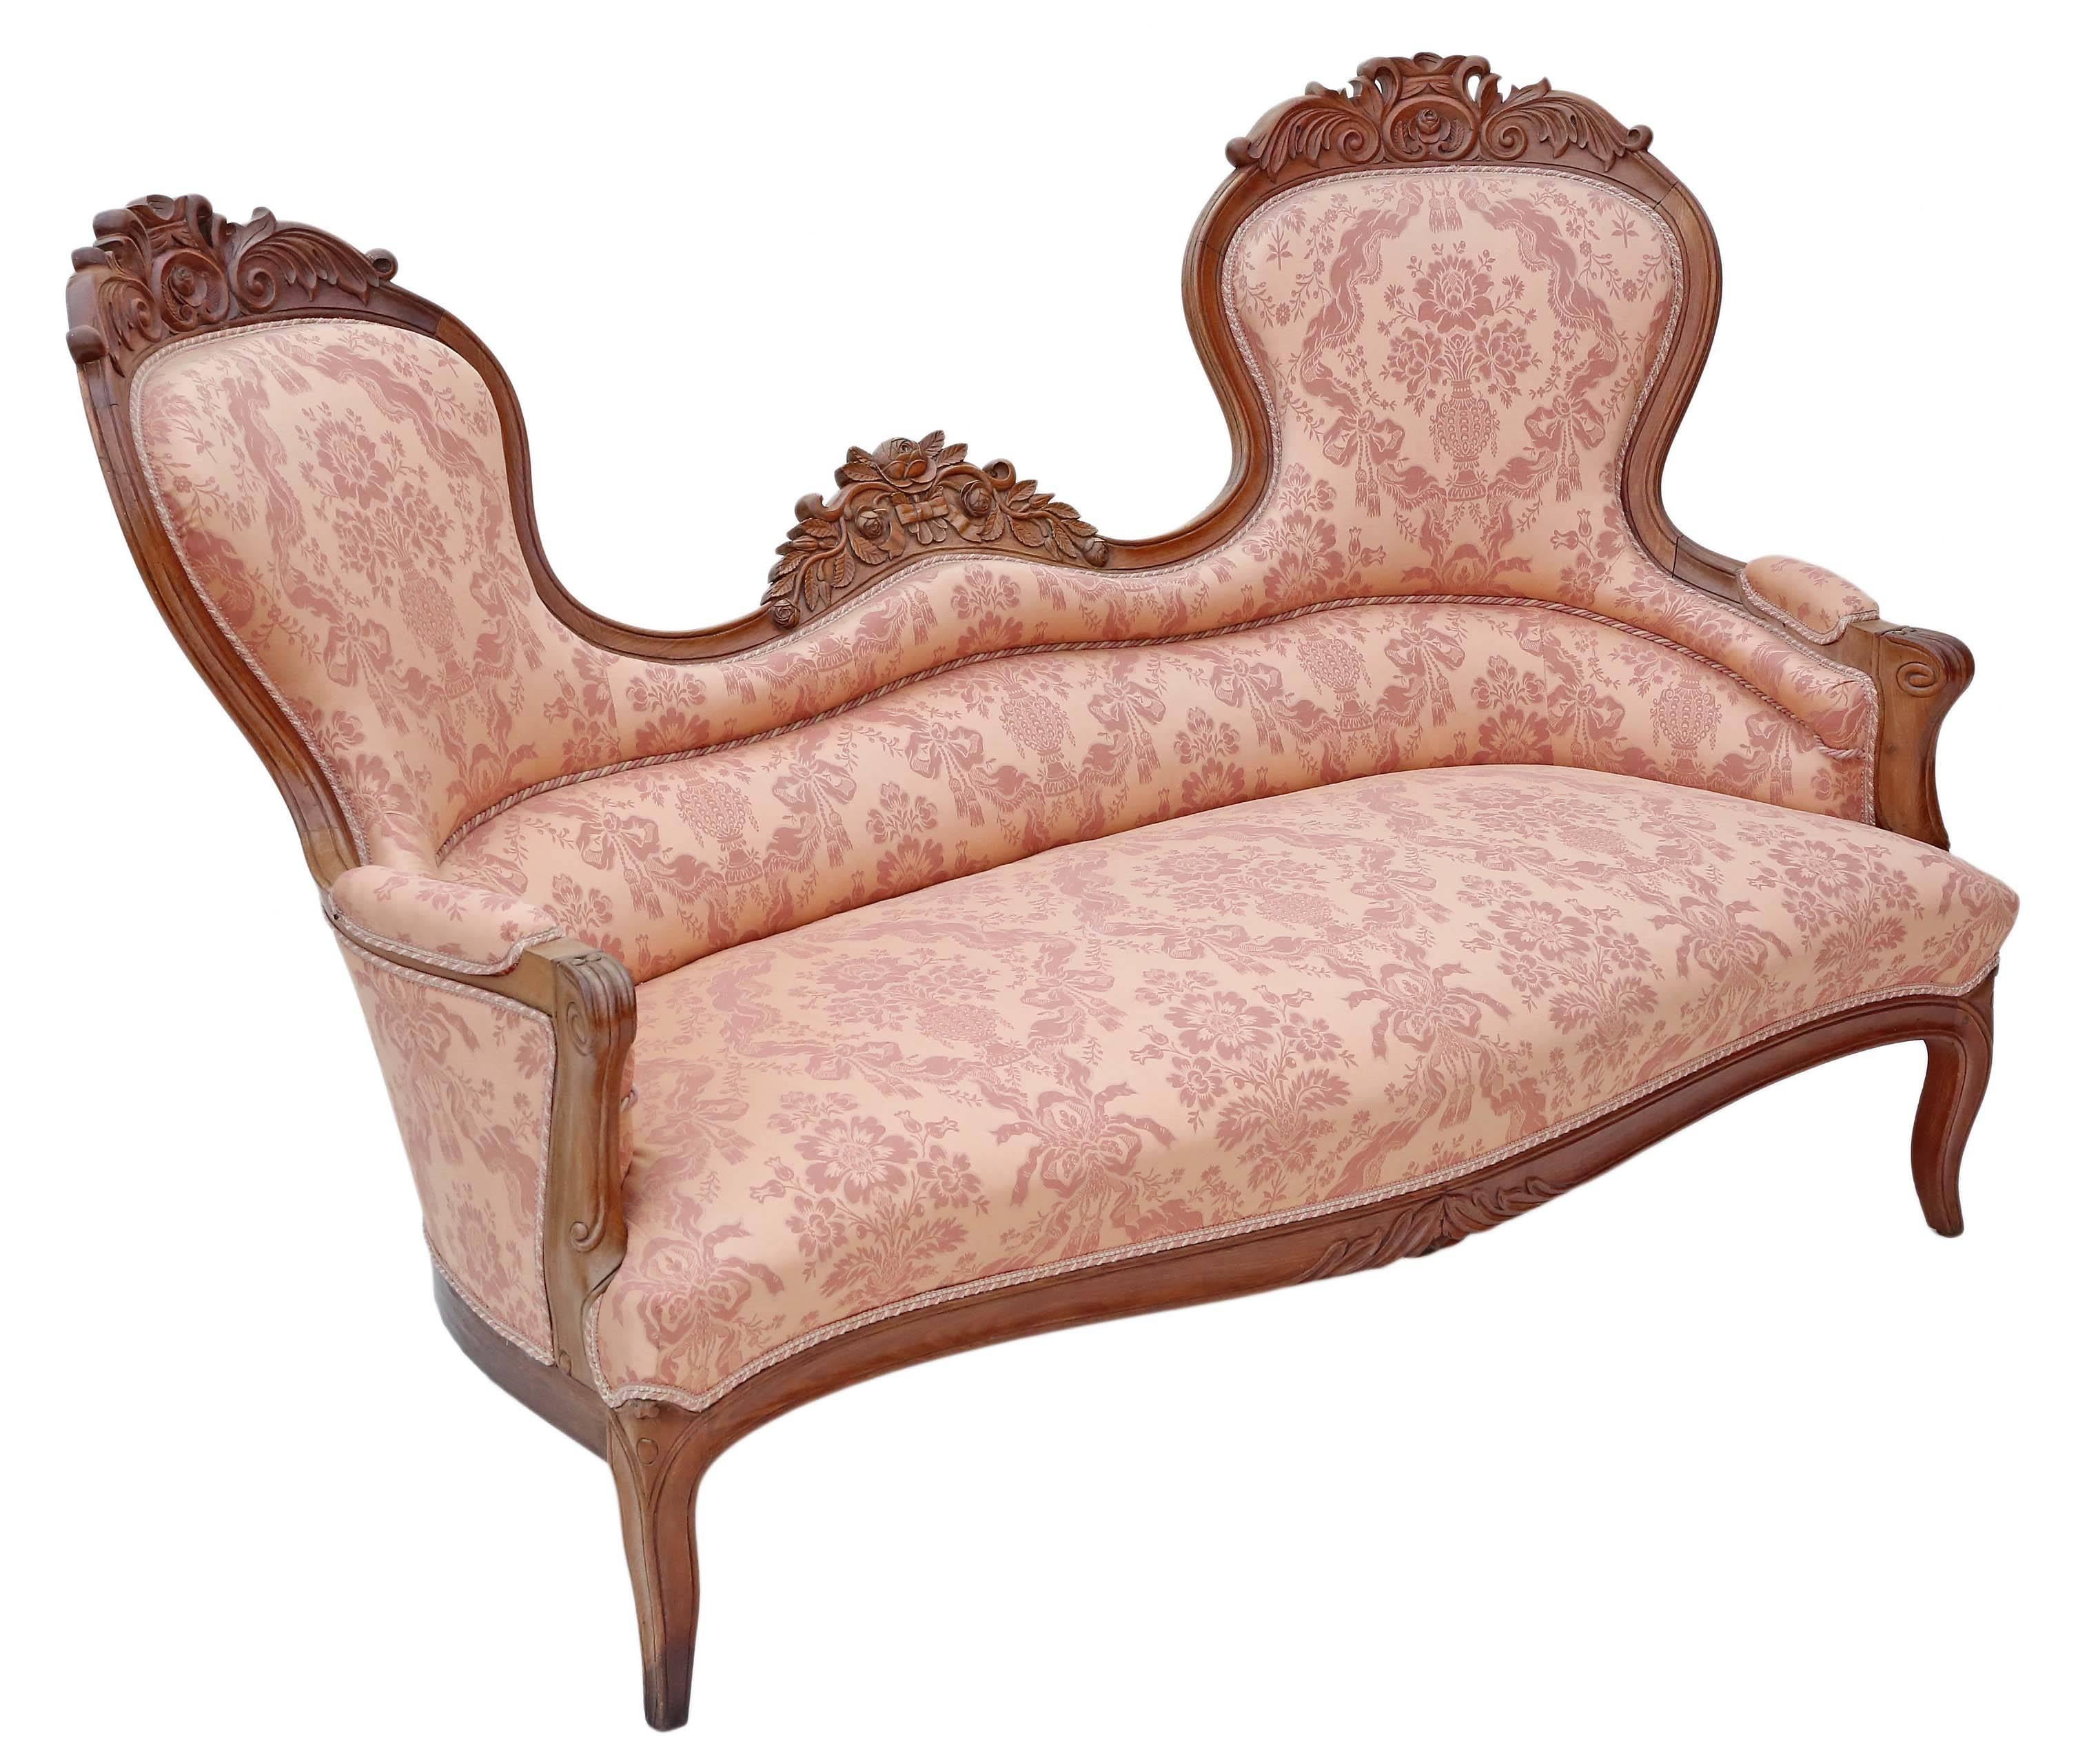 Art Nouveau Antique Quality 19th Century Carved French Walnut Sofa Settee Chaise Longue For Sale